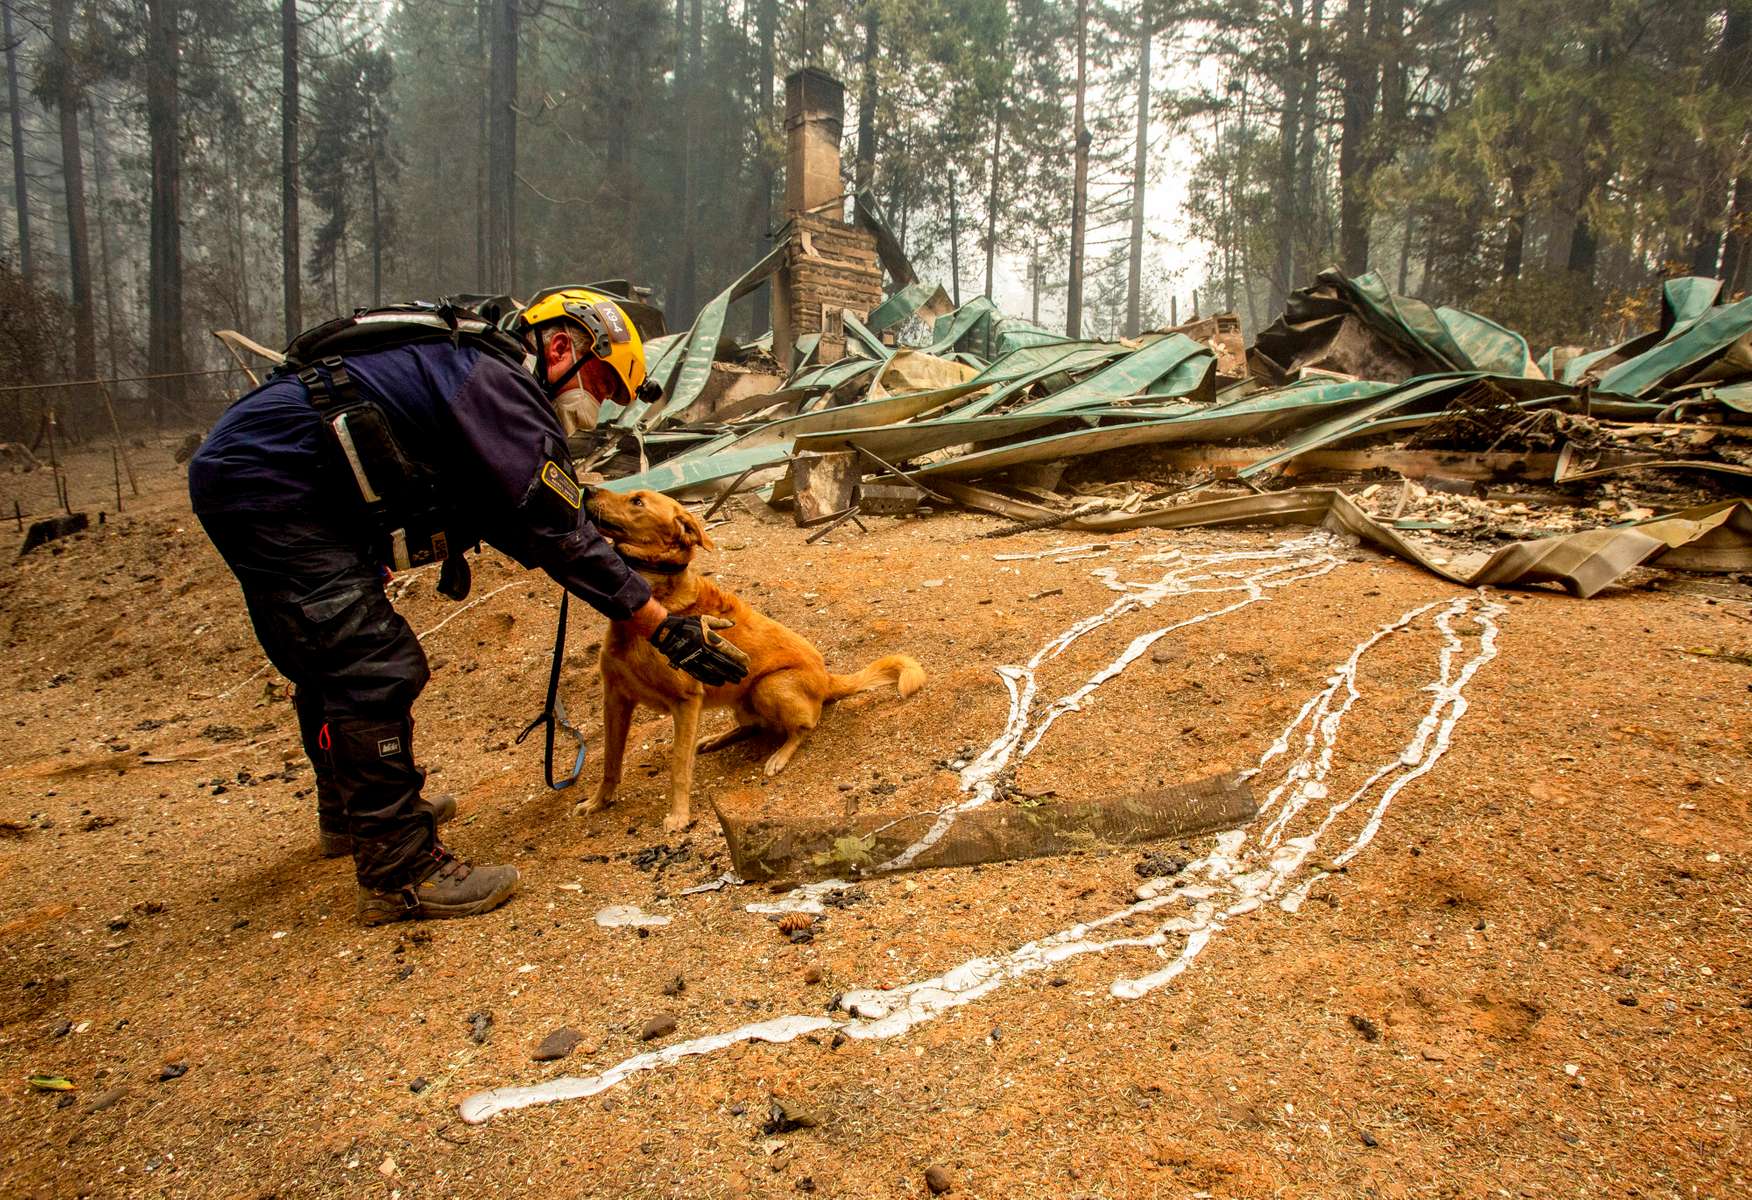 Keith Davis, a member of Washington Task Force One Search and Rescue squad praises search and rescue dog, Asher, while conducting operations Sept. 15, 2020, in Blue River, Oregon in areas affected by the Holiday Farm Fire. (pool photo by Andy Nelson/The Register-Guard)